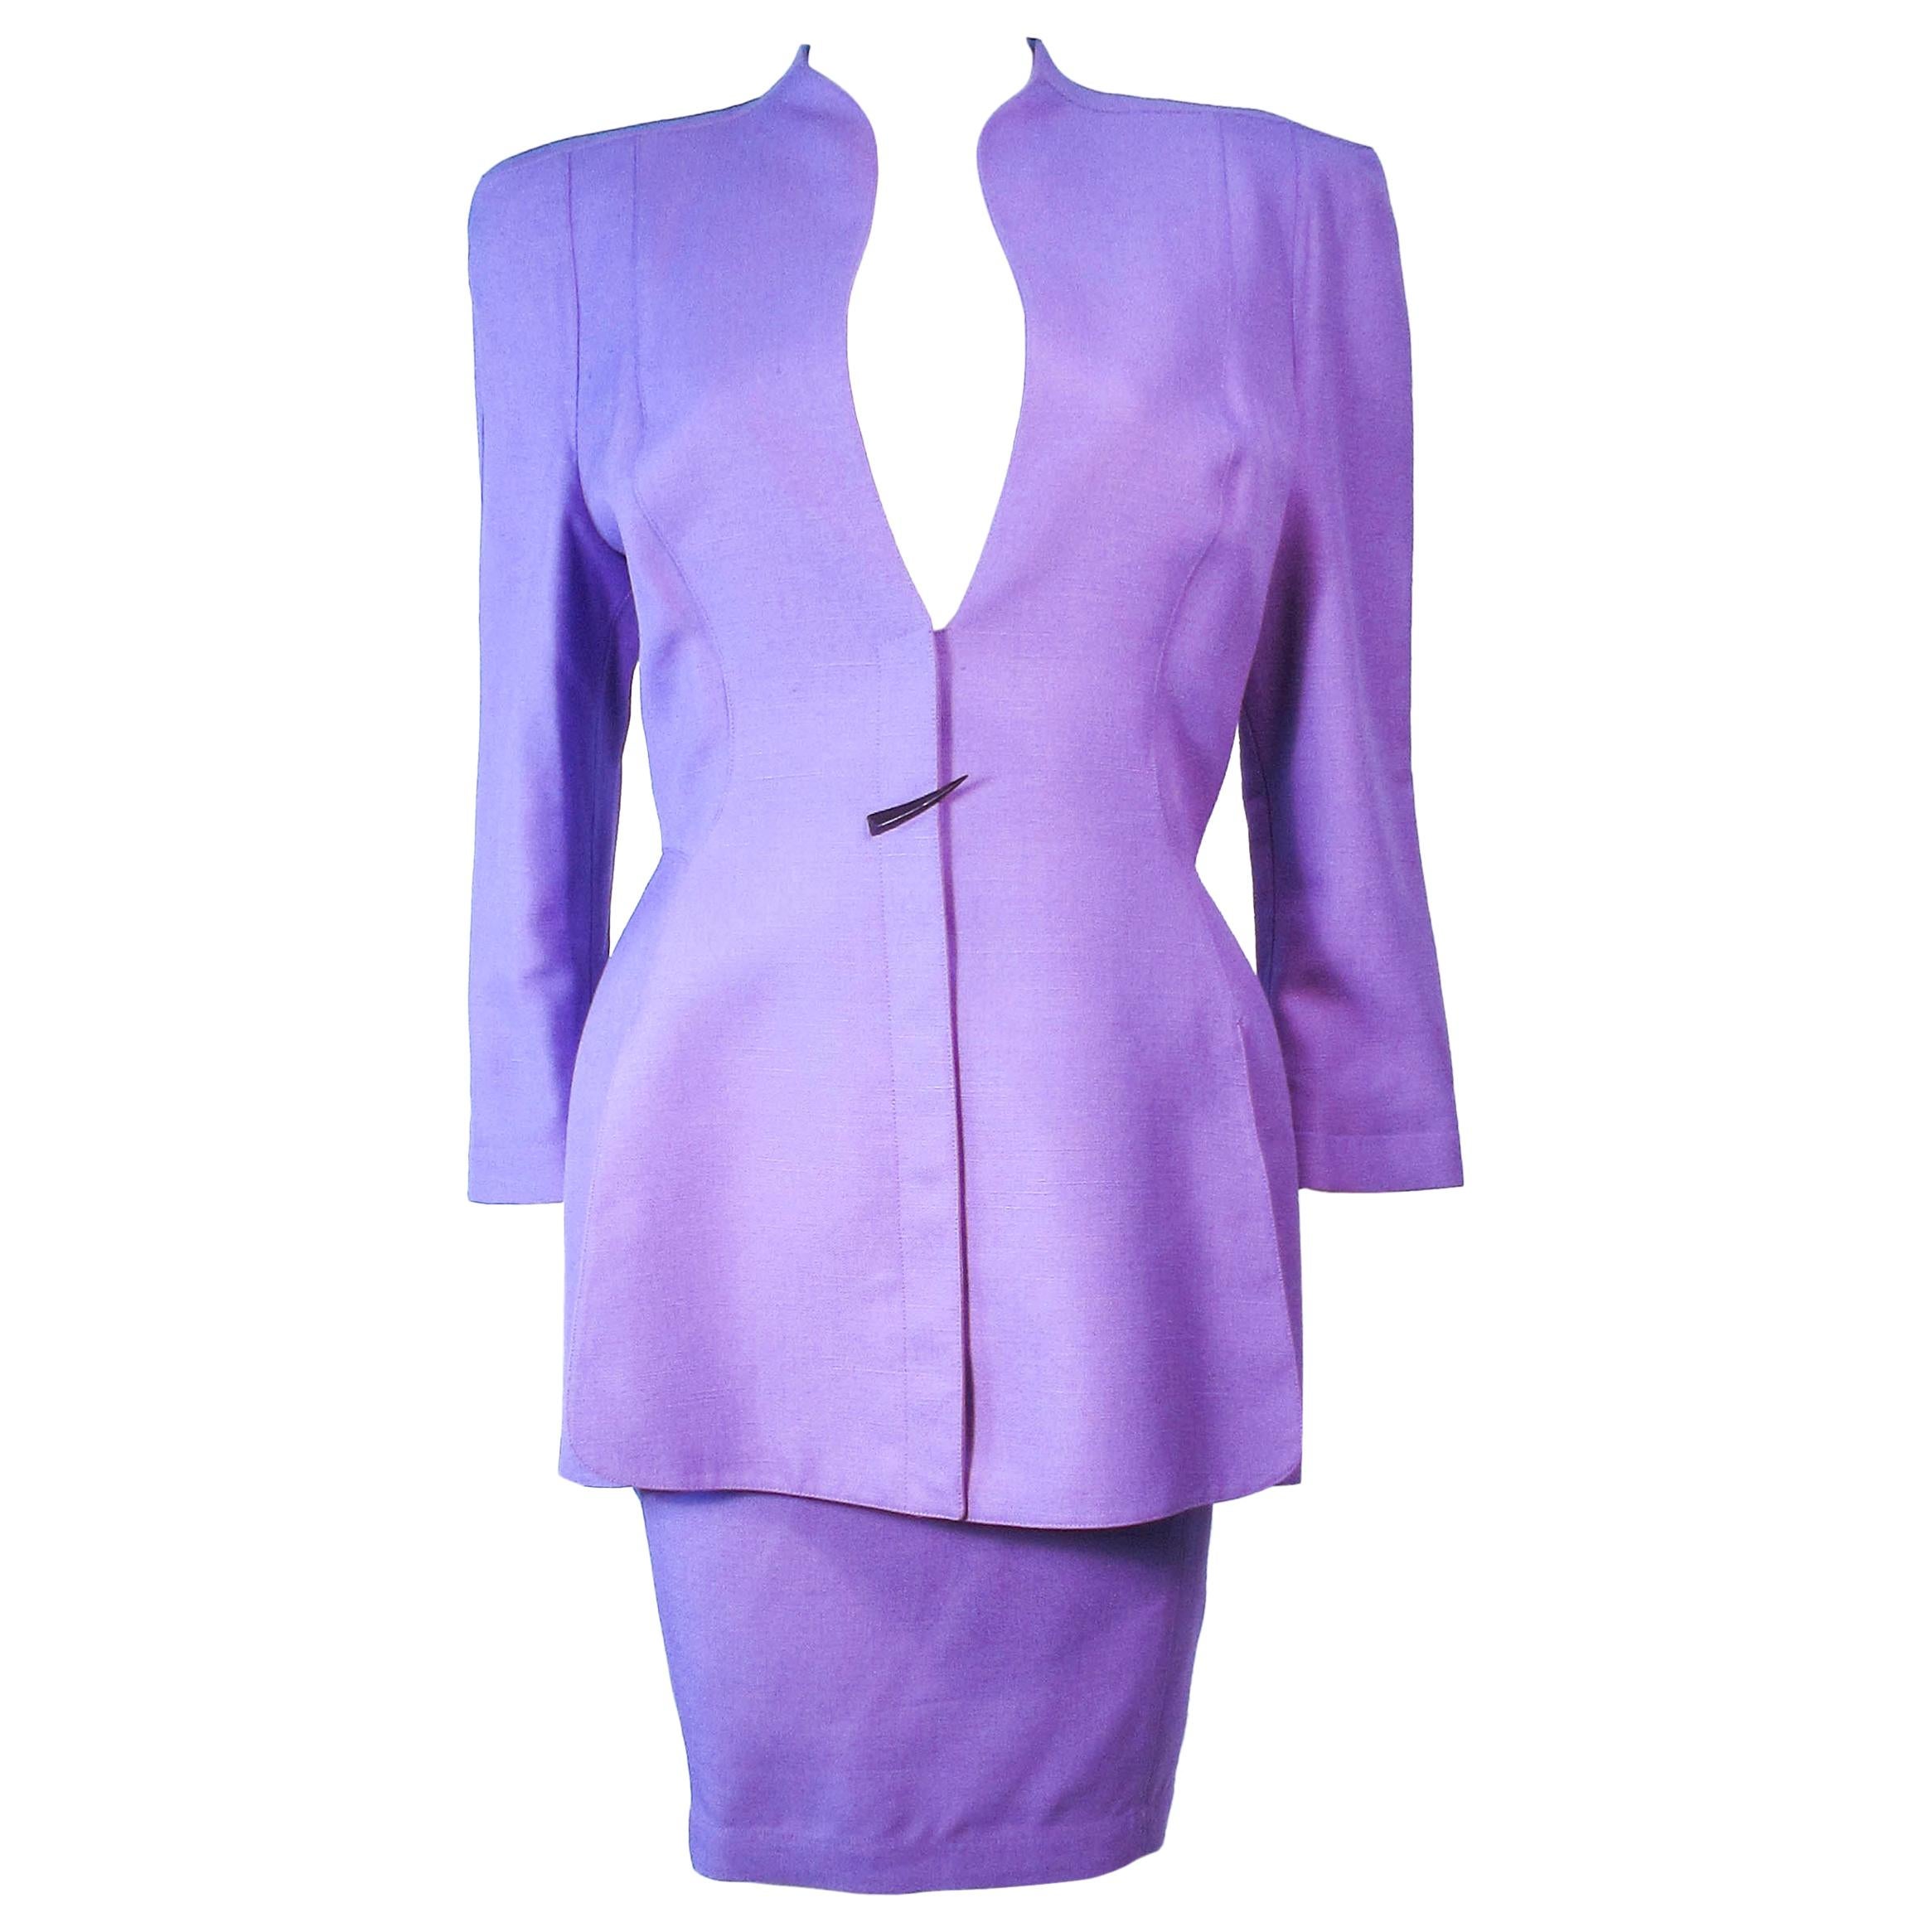 THIERRY MUGLER Fred Heyman Lavender 2pc Skirt Suit with Abstract Closure Size 42 For Sale